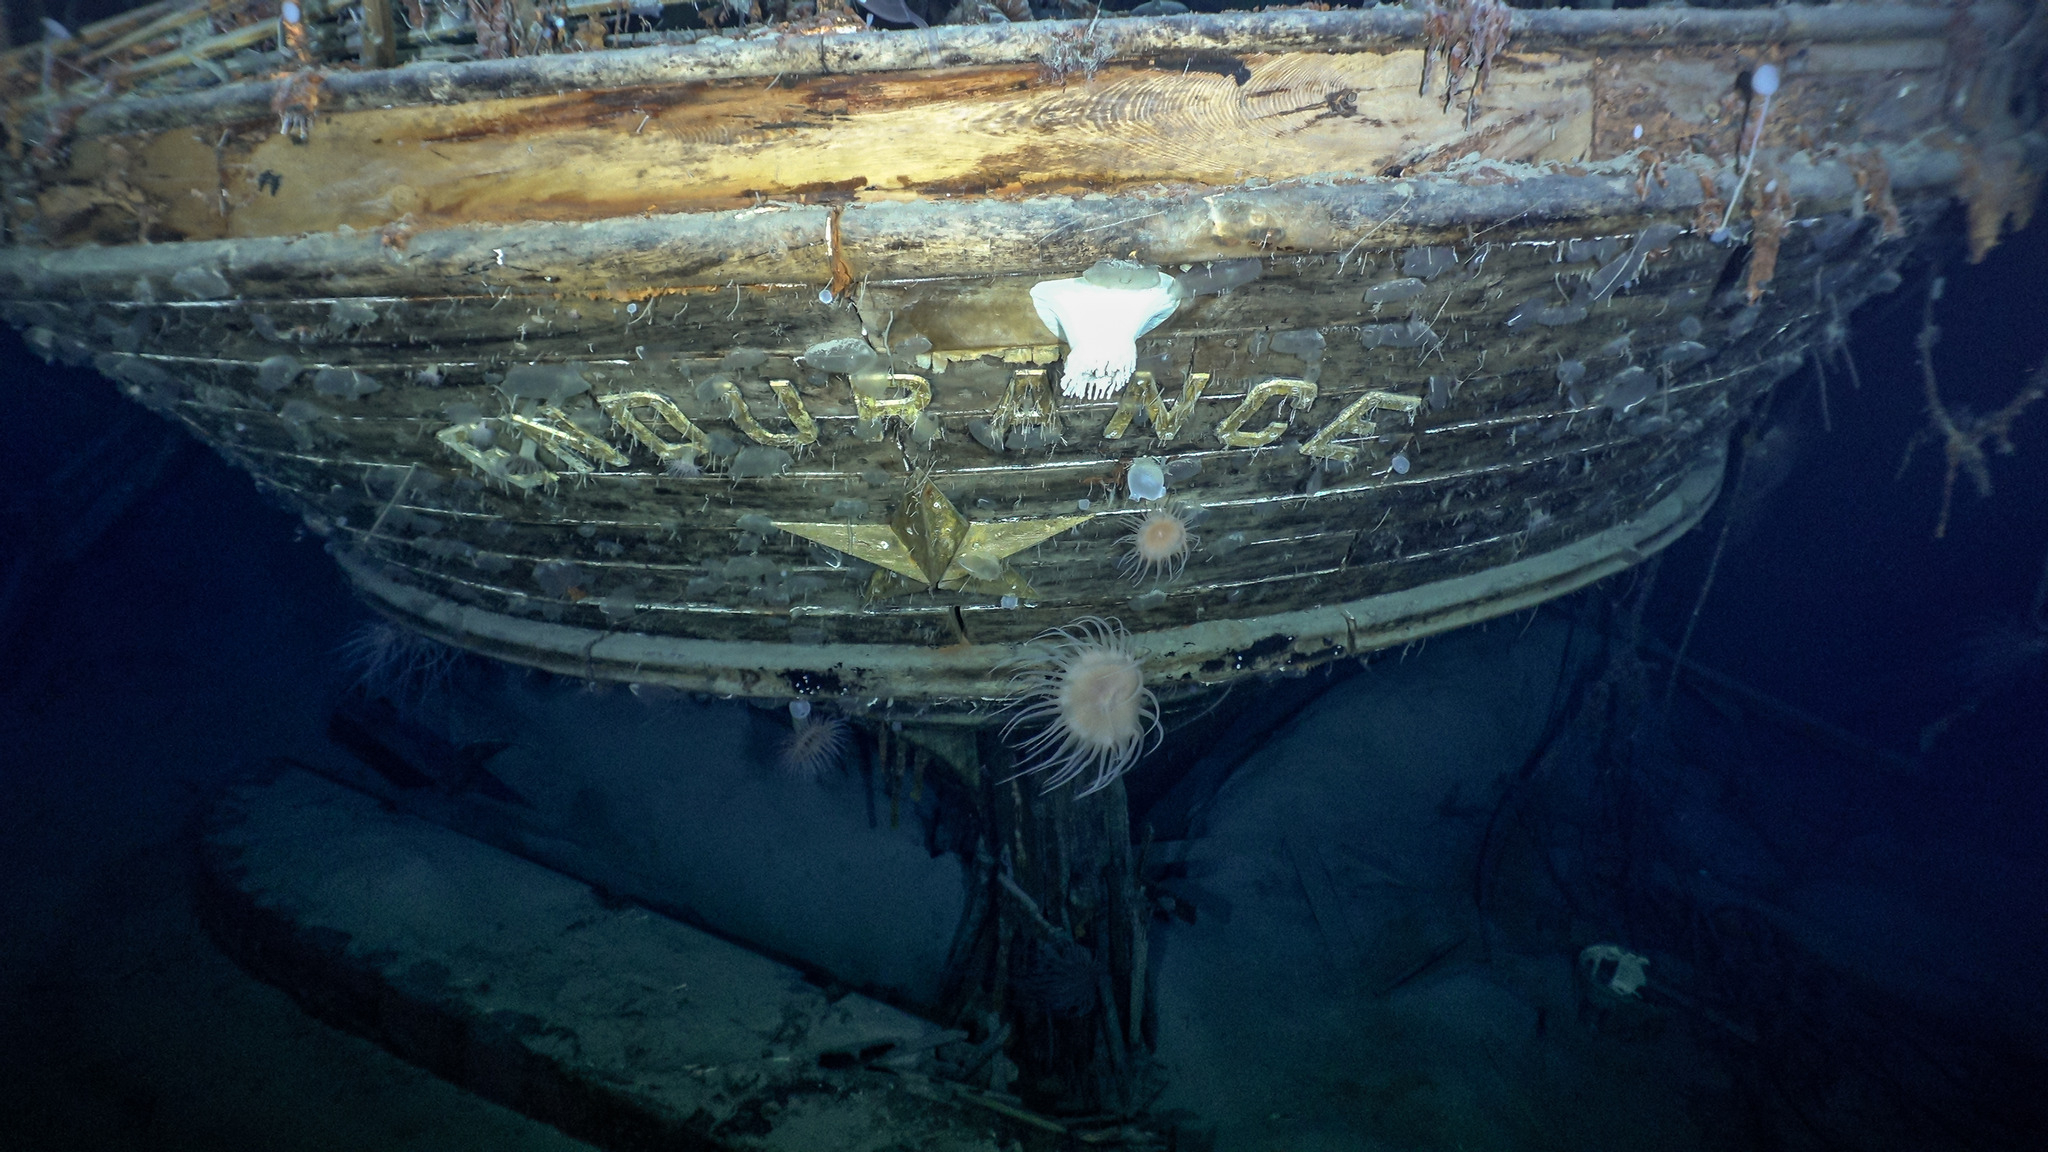 The wreckage of Endurance discovered 107 years after it sank in the Antarctic.